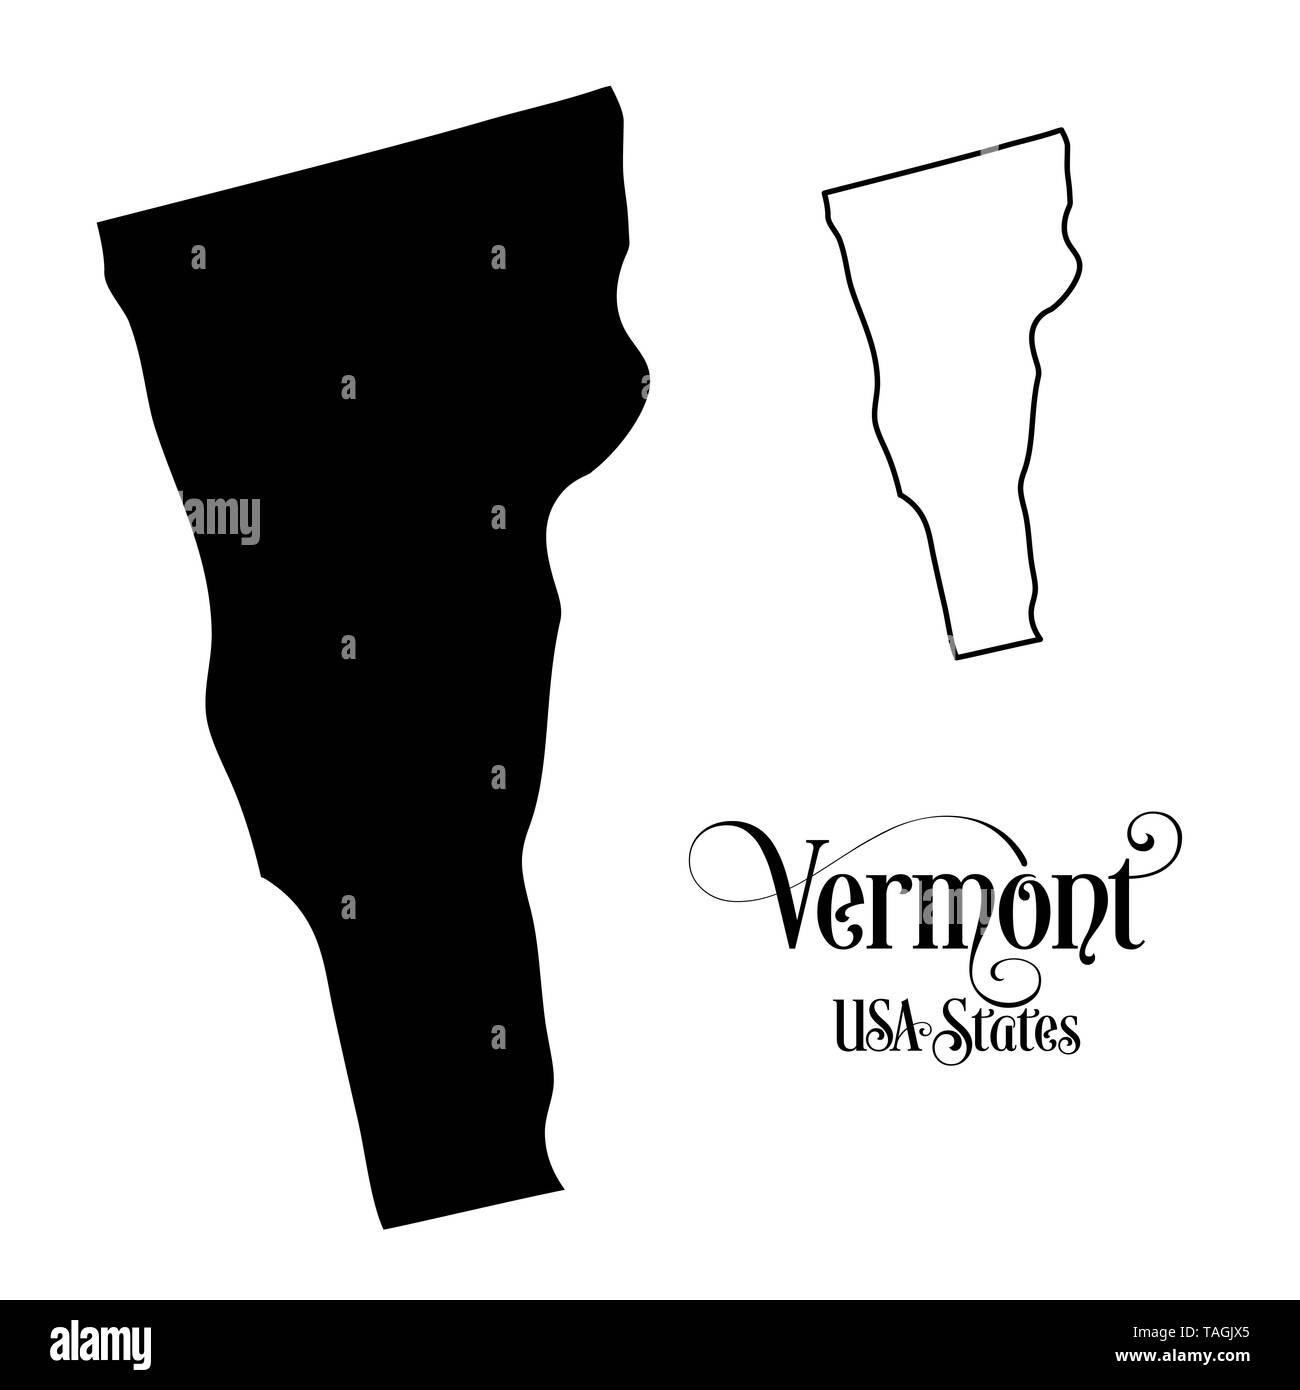 Map of The United States of America (USA) State of Vermont - Illustration on White Background. Stock Photo